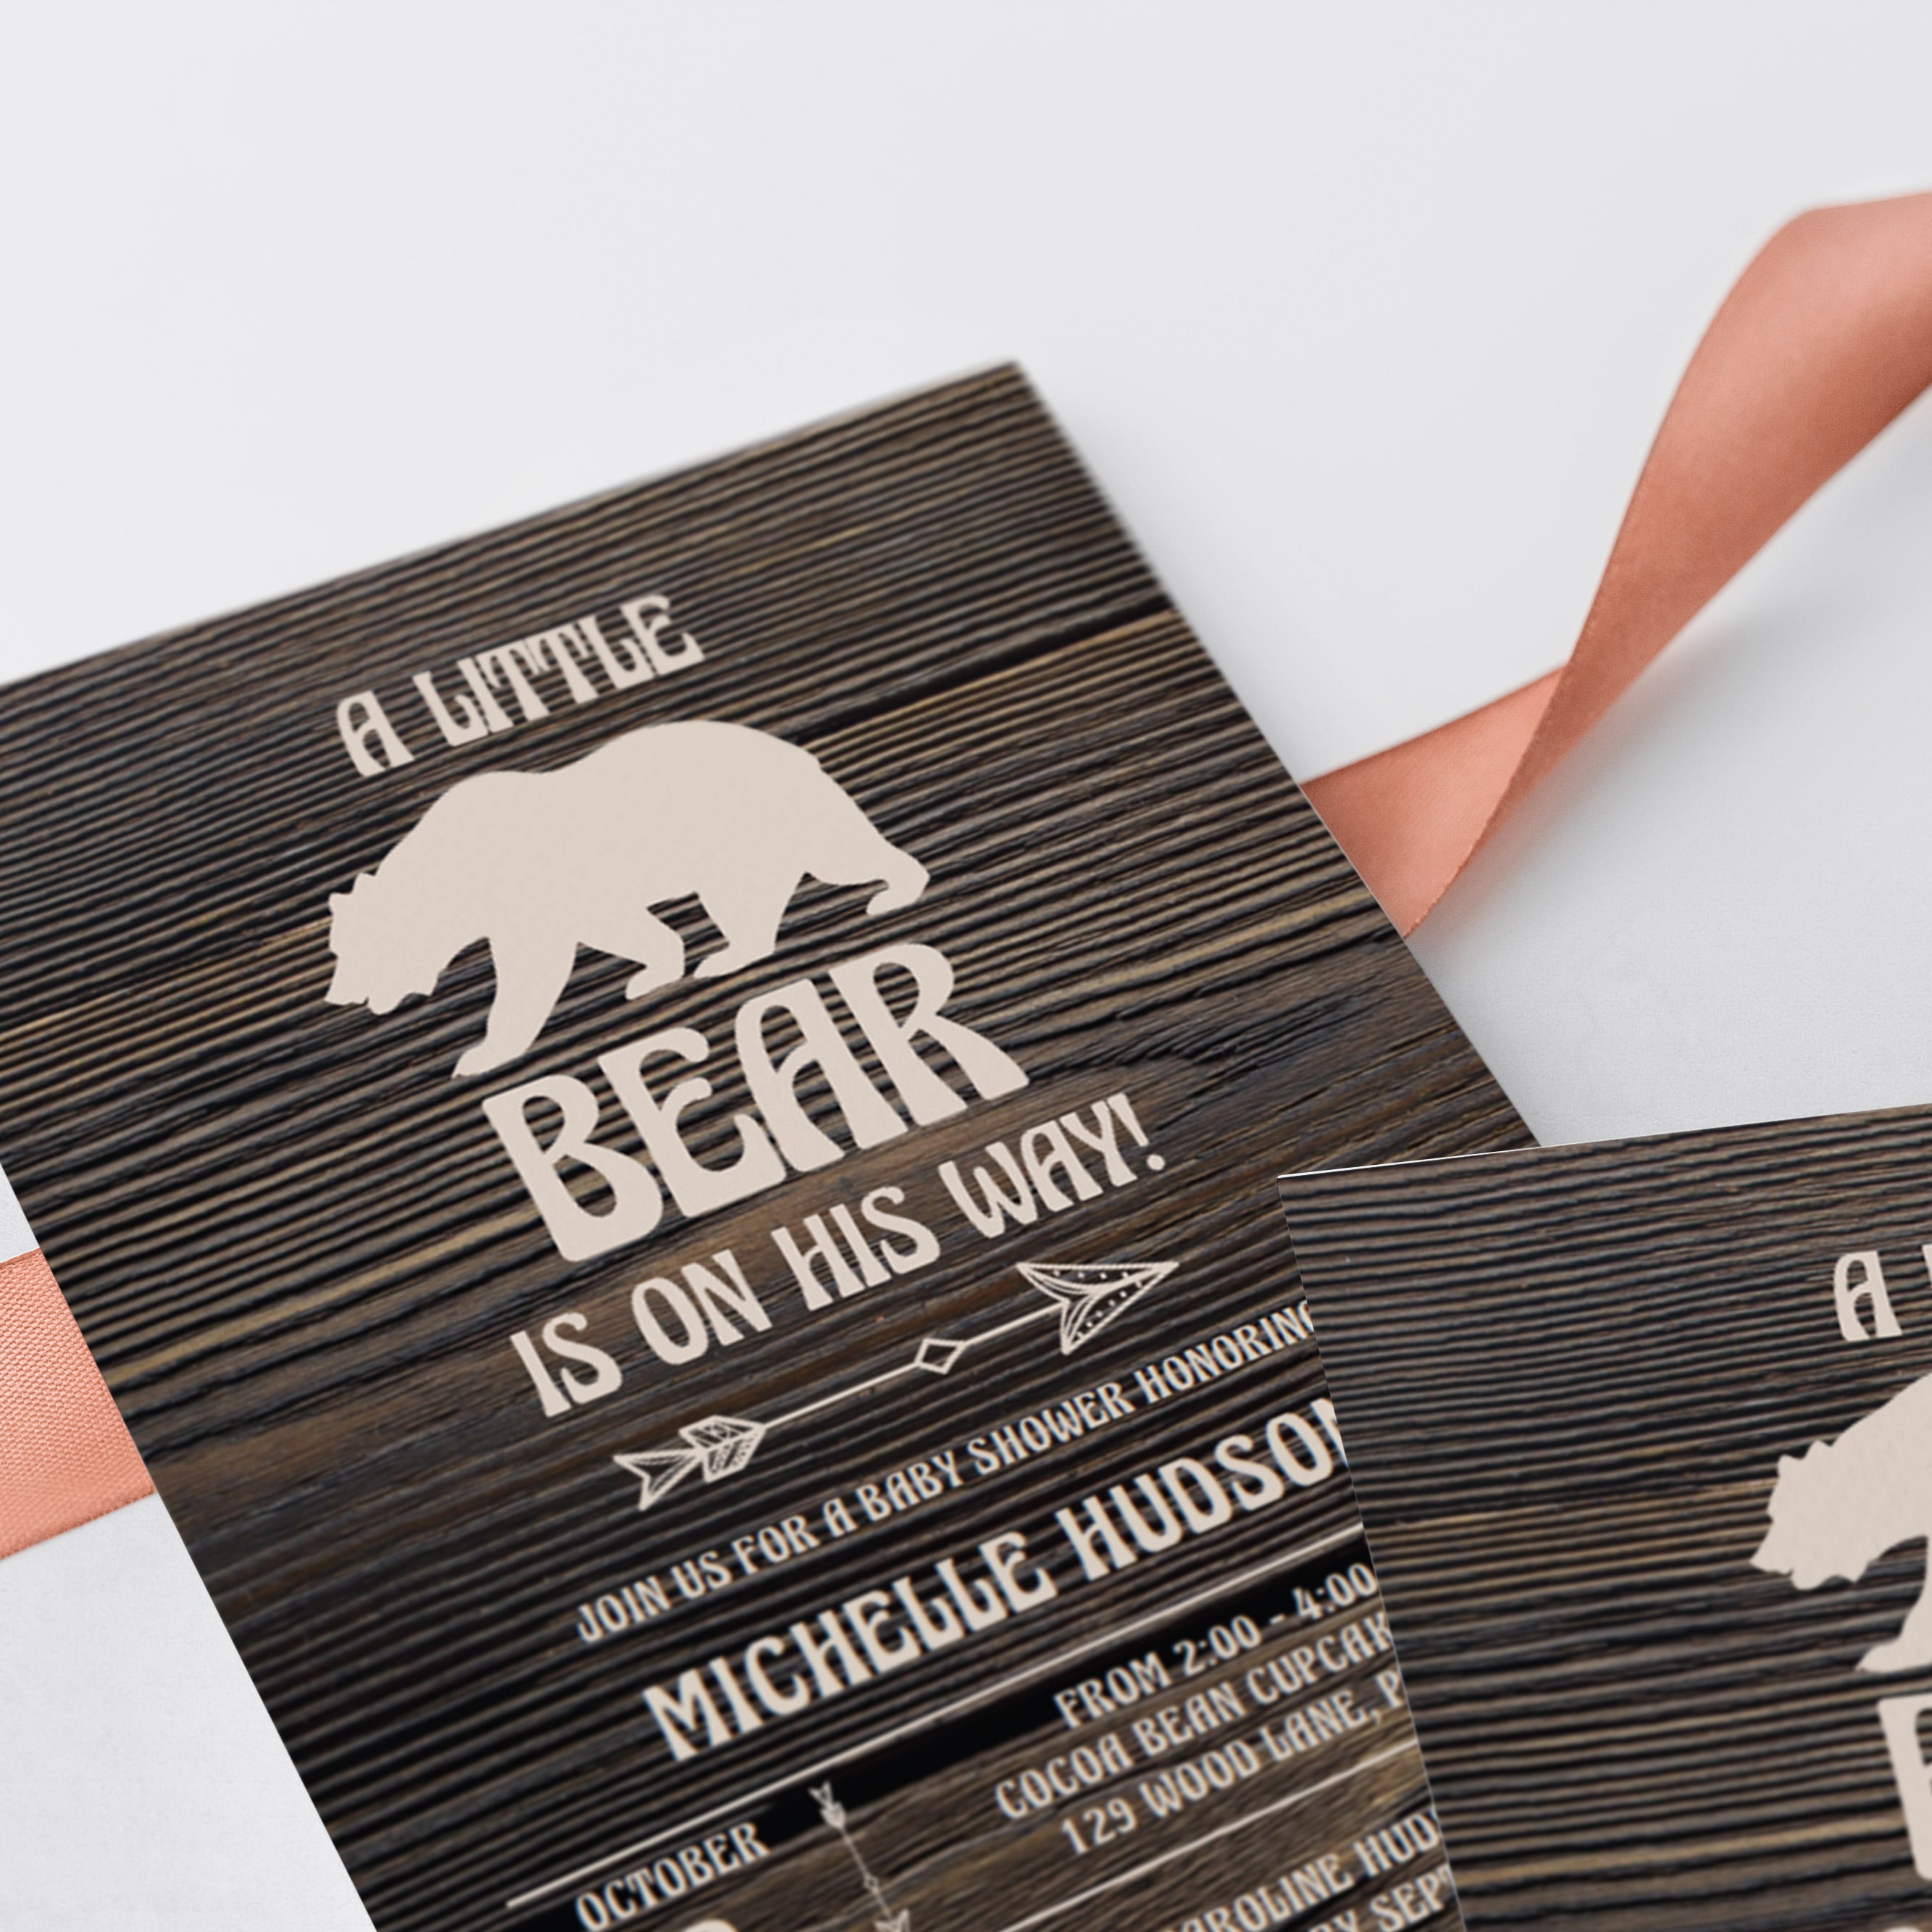 Brown bear baby shower invitation download by LittleSizzle